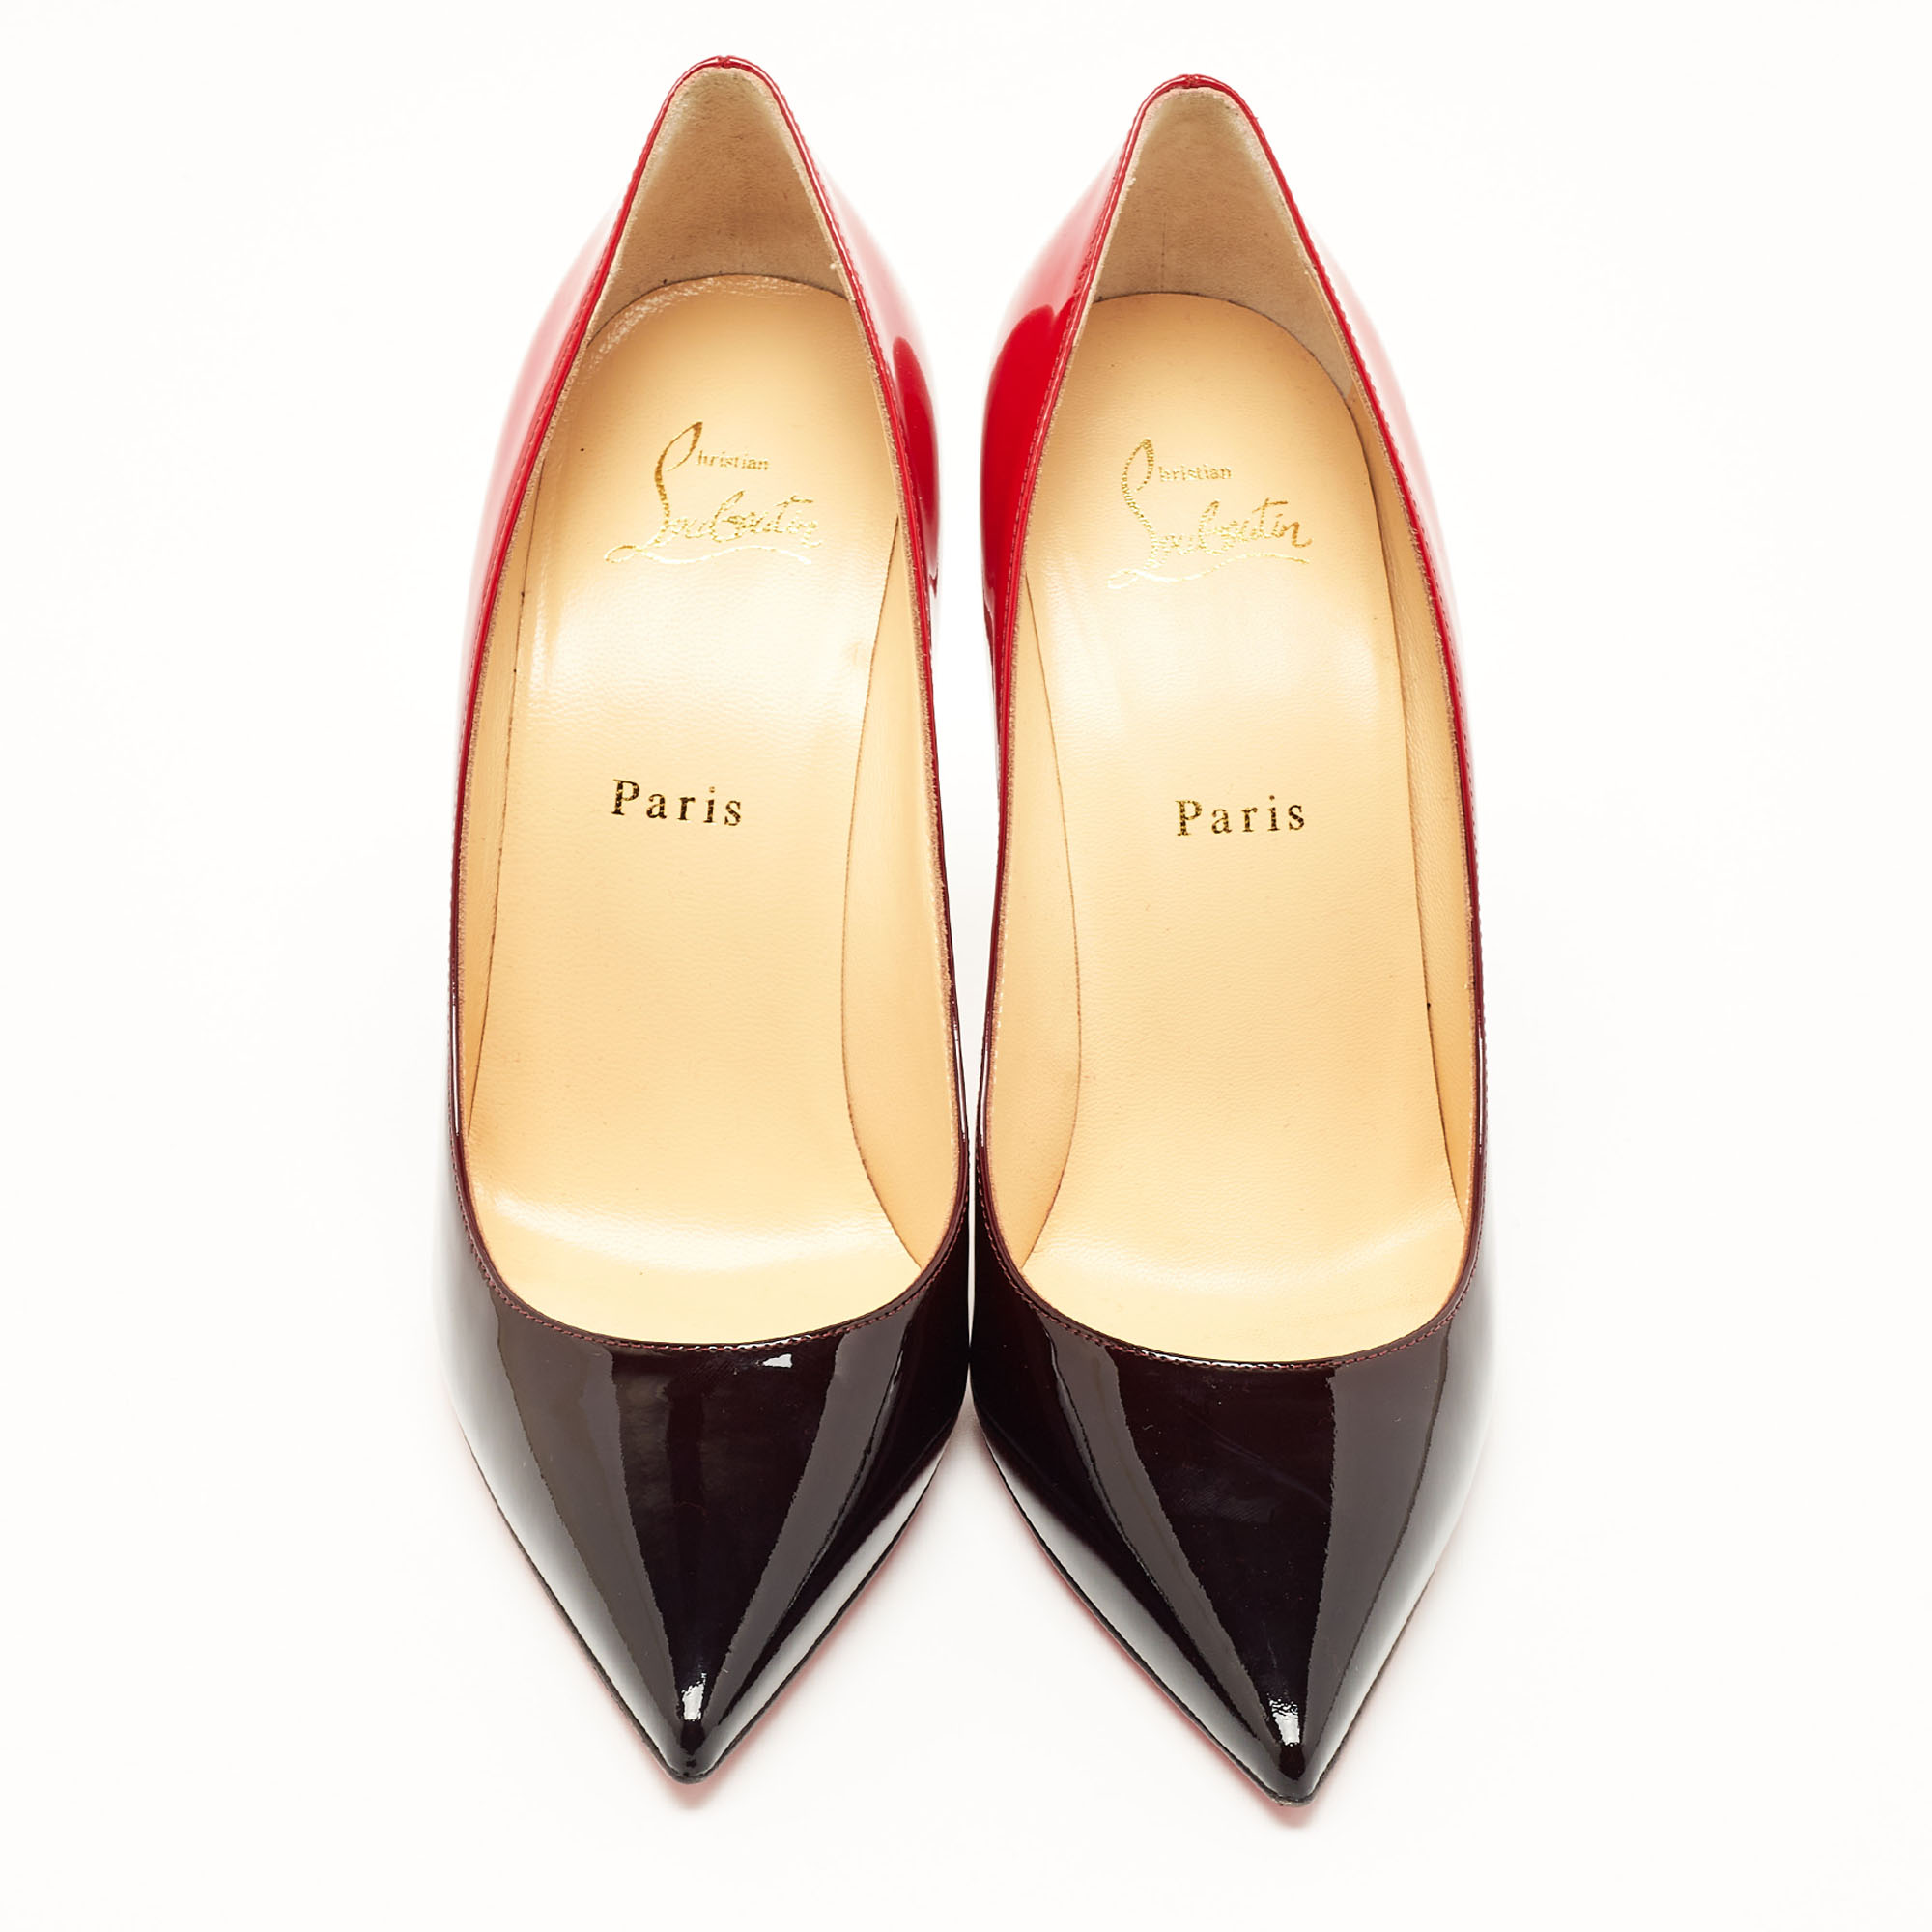 Christian Louboutin Black/Red Ombre Patent Leather Kate Pumps Size 39.5